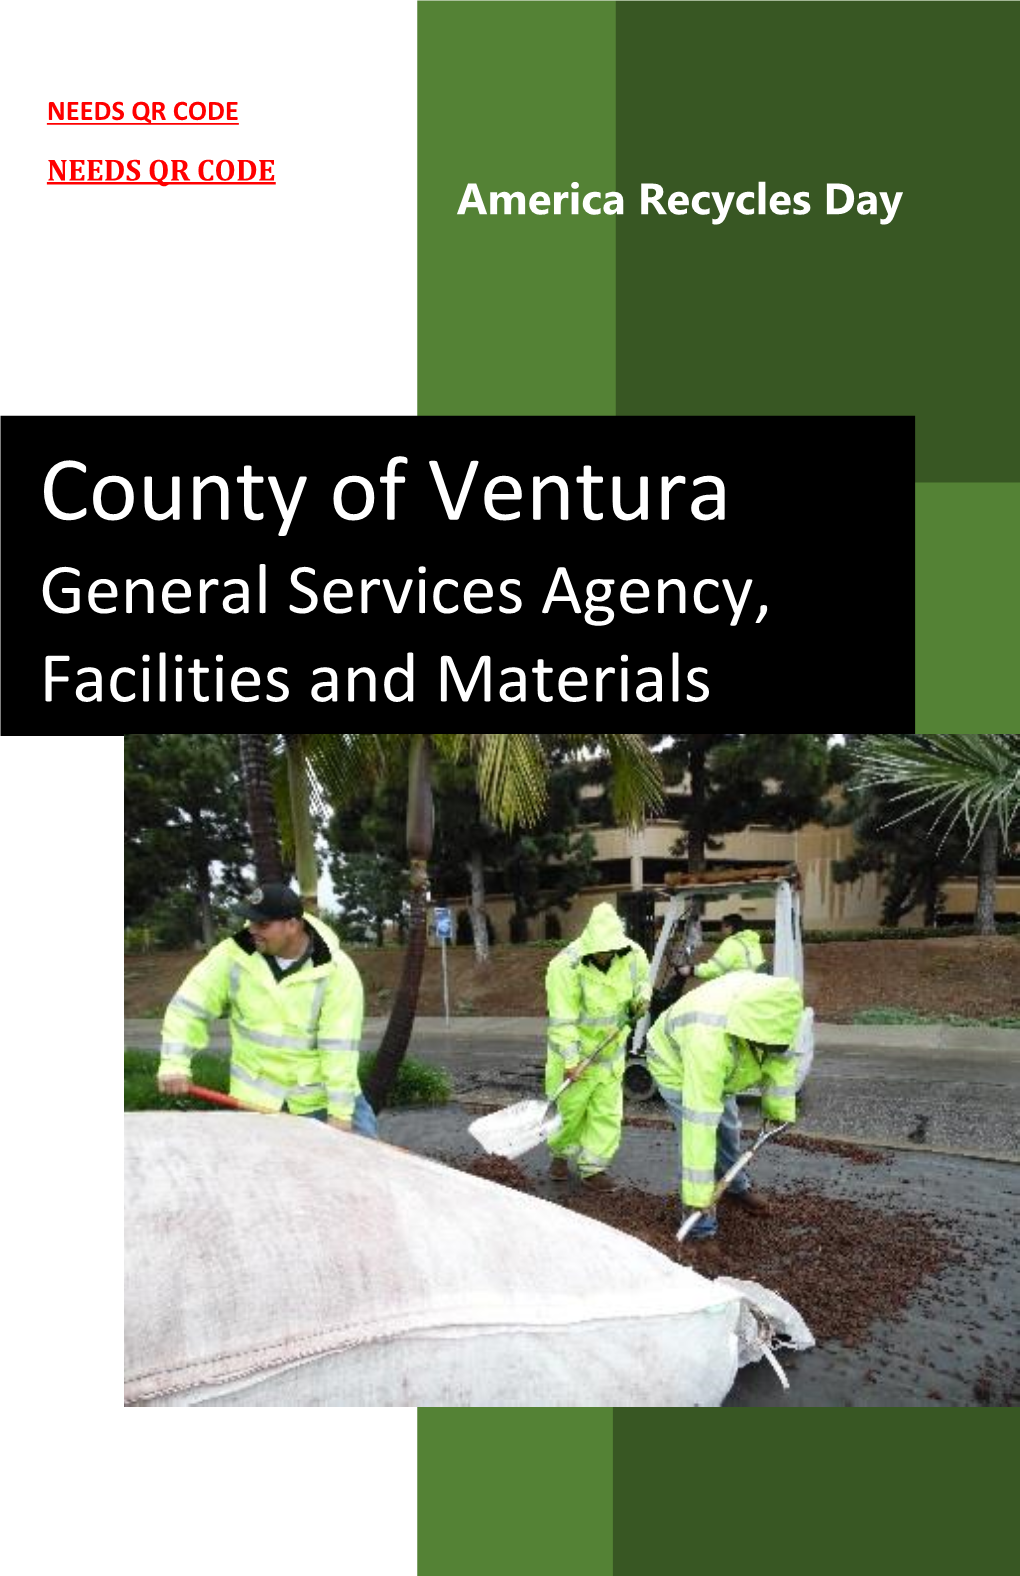 General Services Agency, Facilities and Materials GSA Is Going Green, Green, Green in Everything